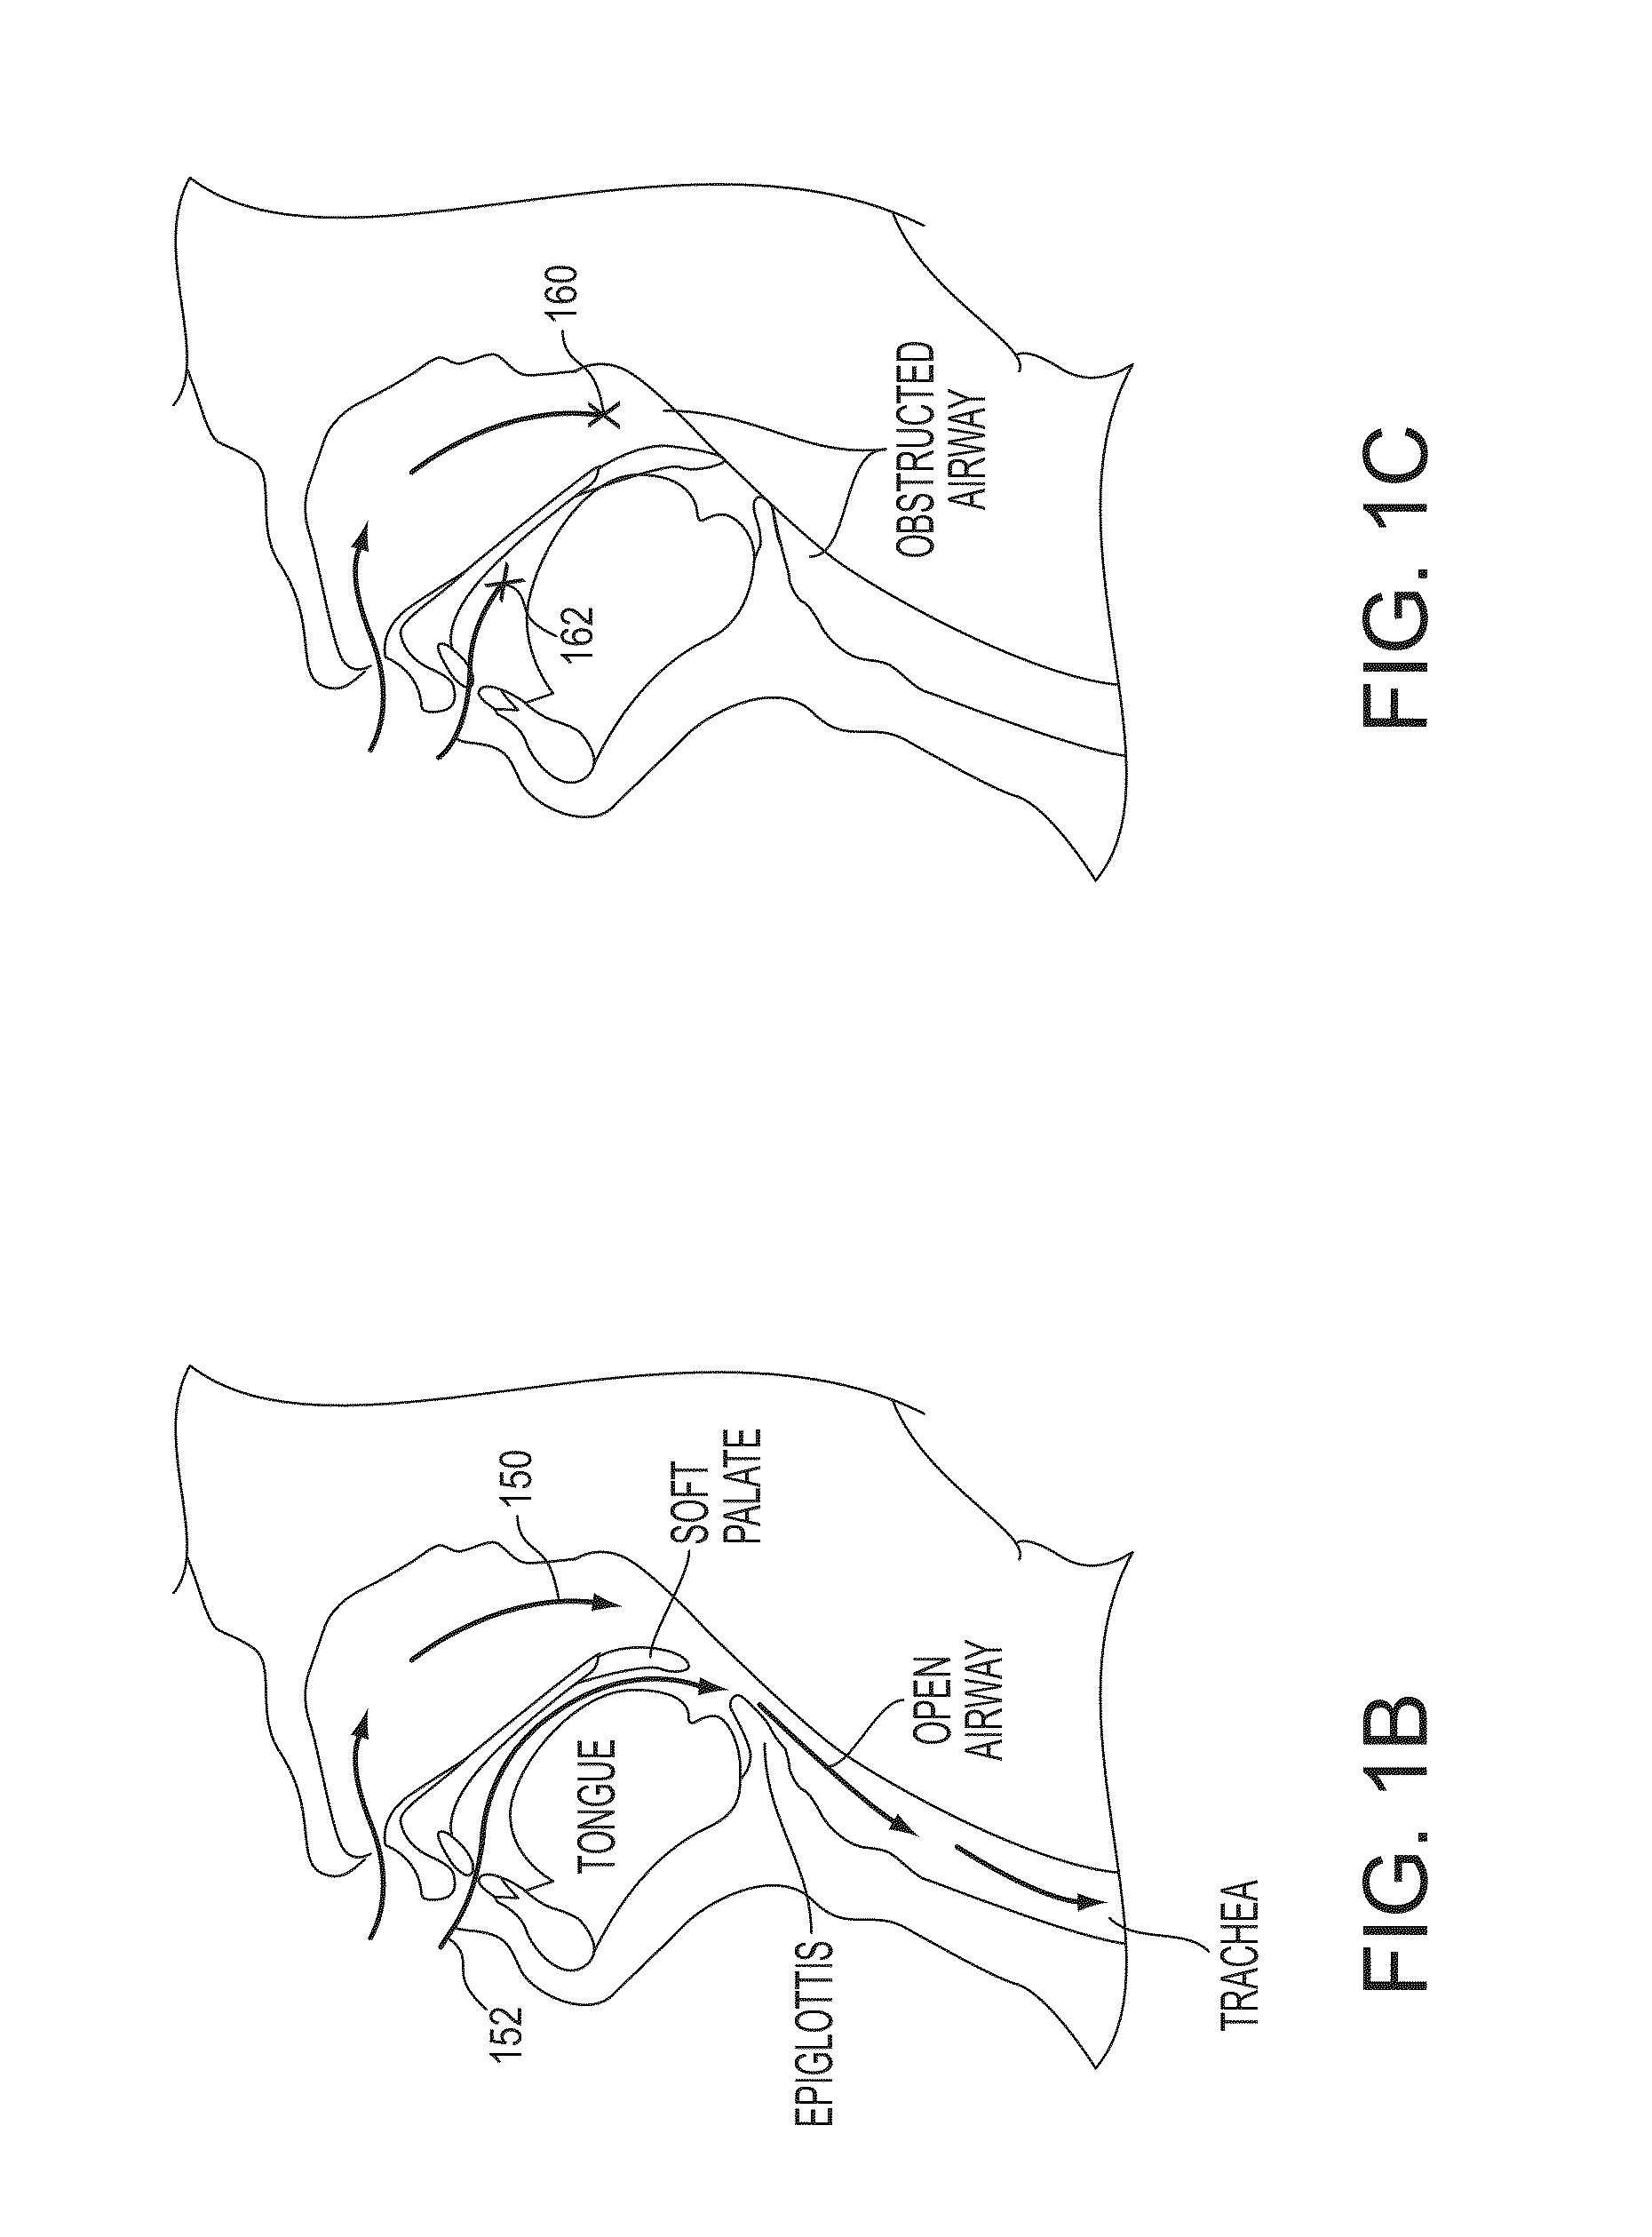 Systems, methods and devices for diagnosing sleep apnea